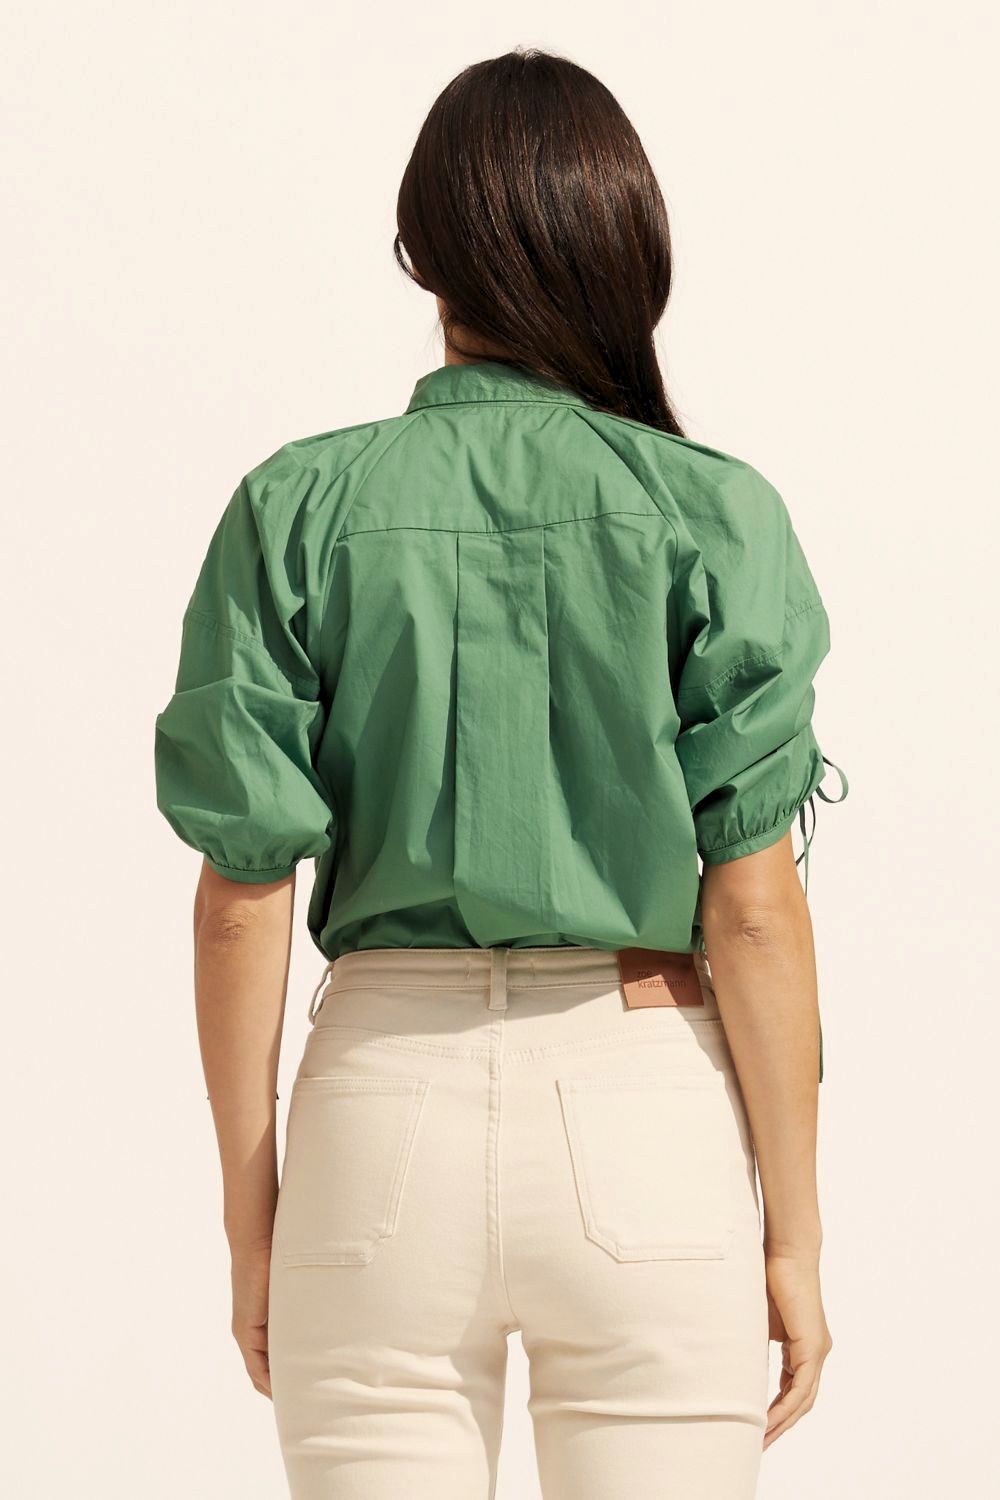 shirt, green, button up, rouched sleeves, adjustable ties on sleeves, back image